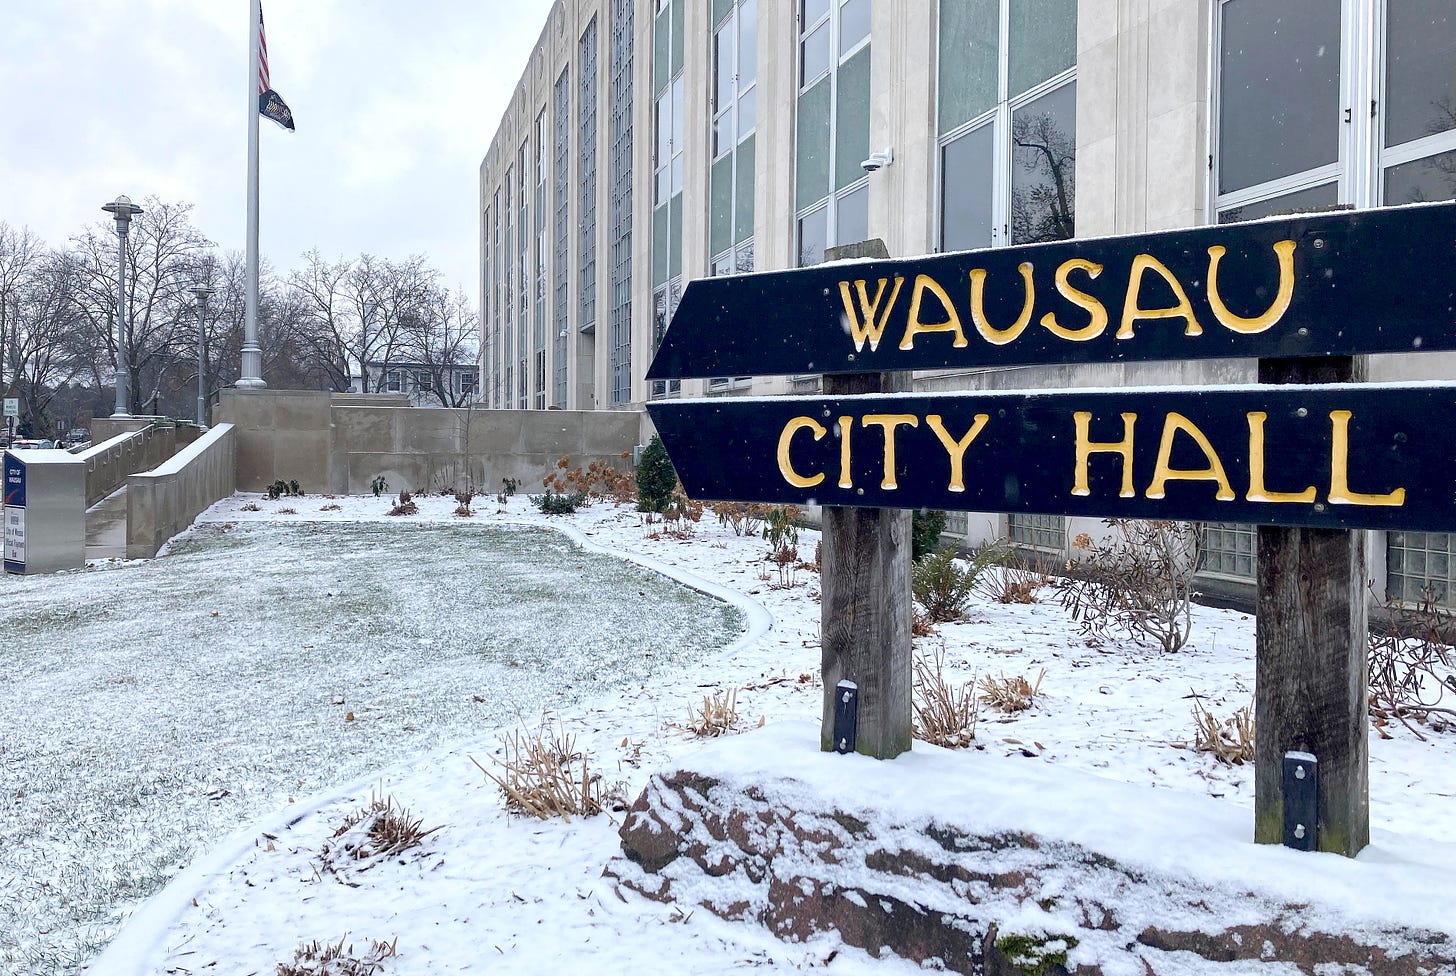 The Wausau City Council voted unanimously to terminate the deal for the Riverlife Condos project after repeated delays and changes during their meeting Tuesday. It was covered by Evan J. Pretzer in The Wausau Sentinel.